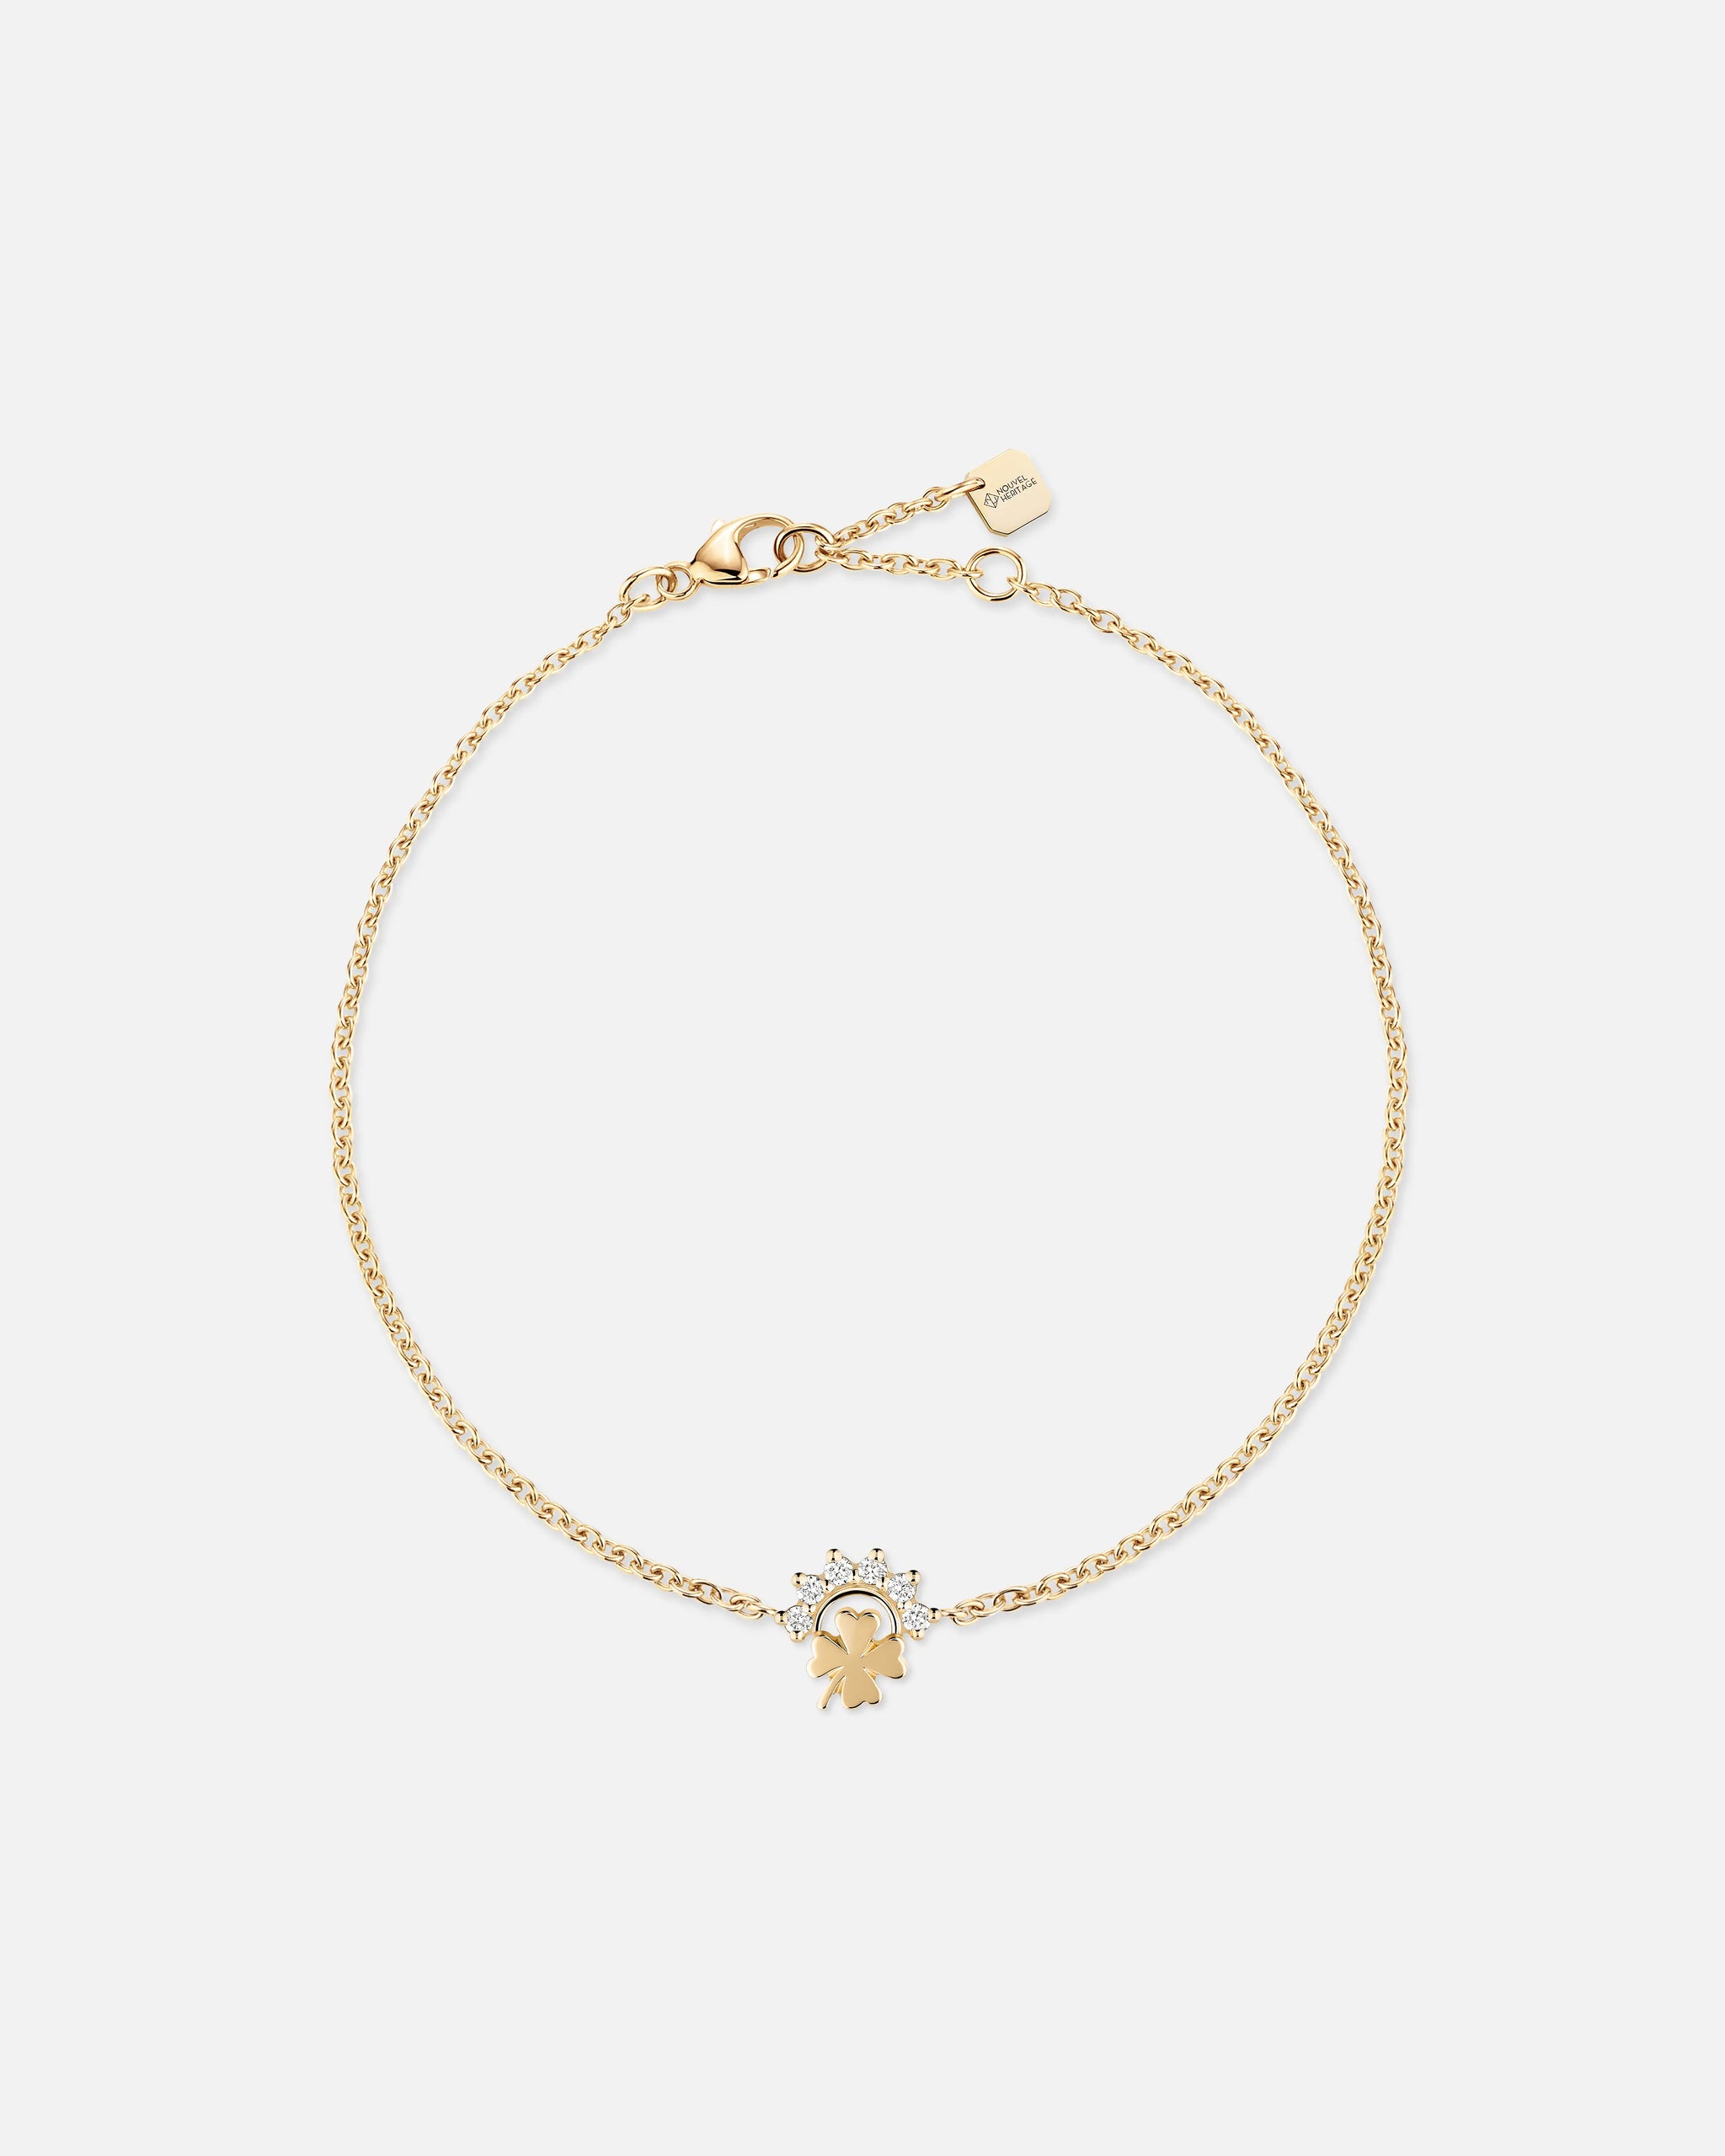 Small Luck Bracelet in Yellow Gold - 1 - Nouvel Heritage